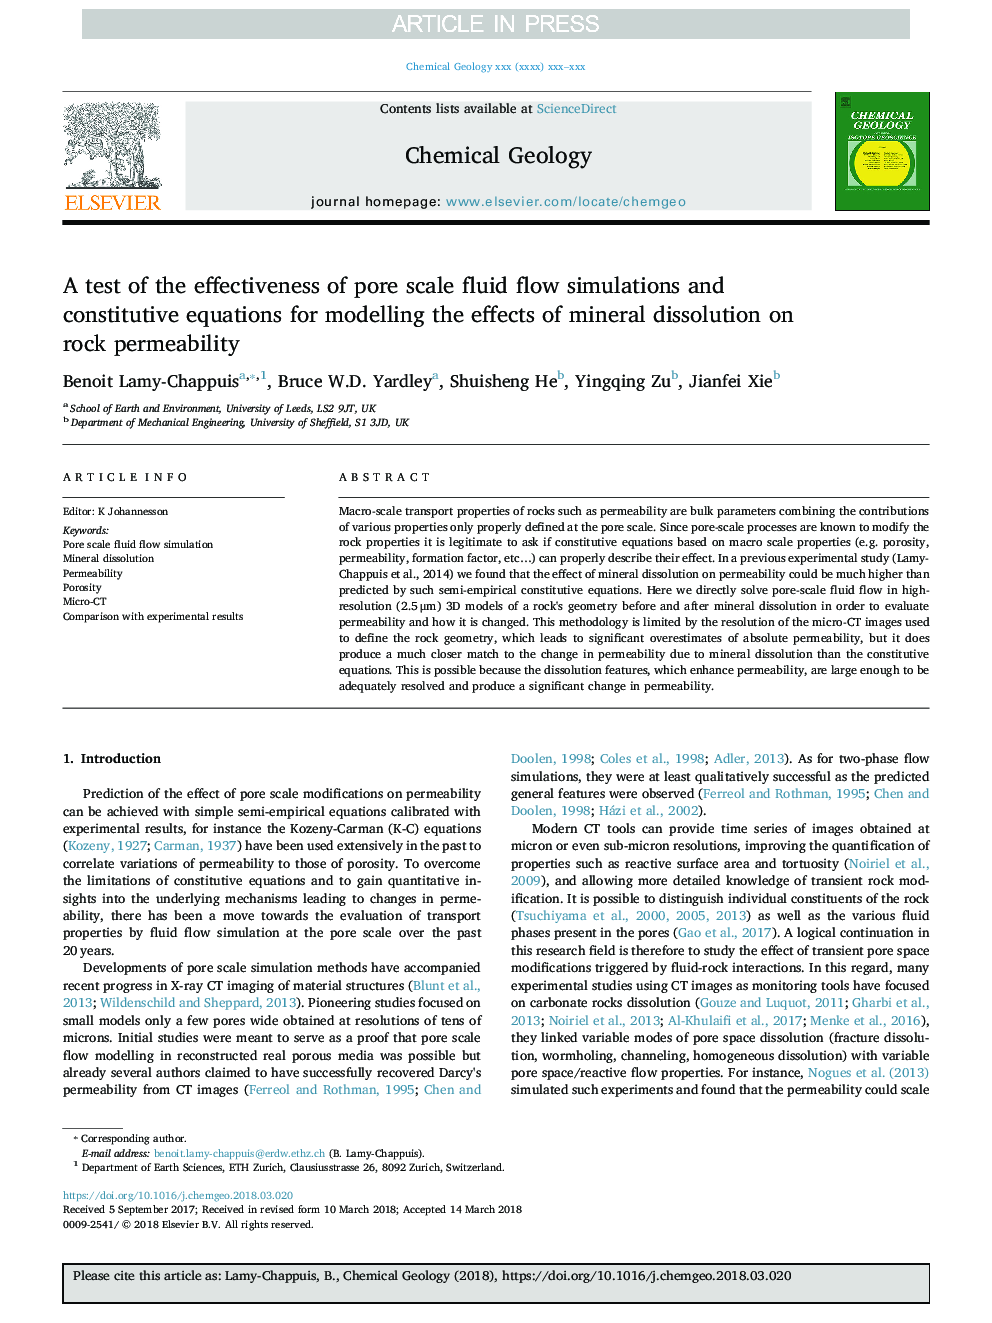 A test of the effectiveness of pore scale fluid flow simulations and constitutive equations for modelling the effects of mineral dissolution on rock permeability